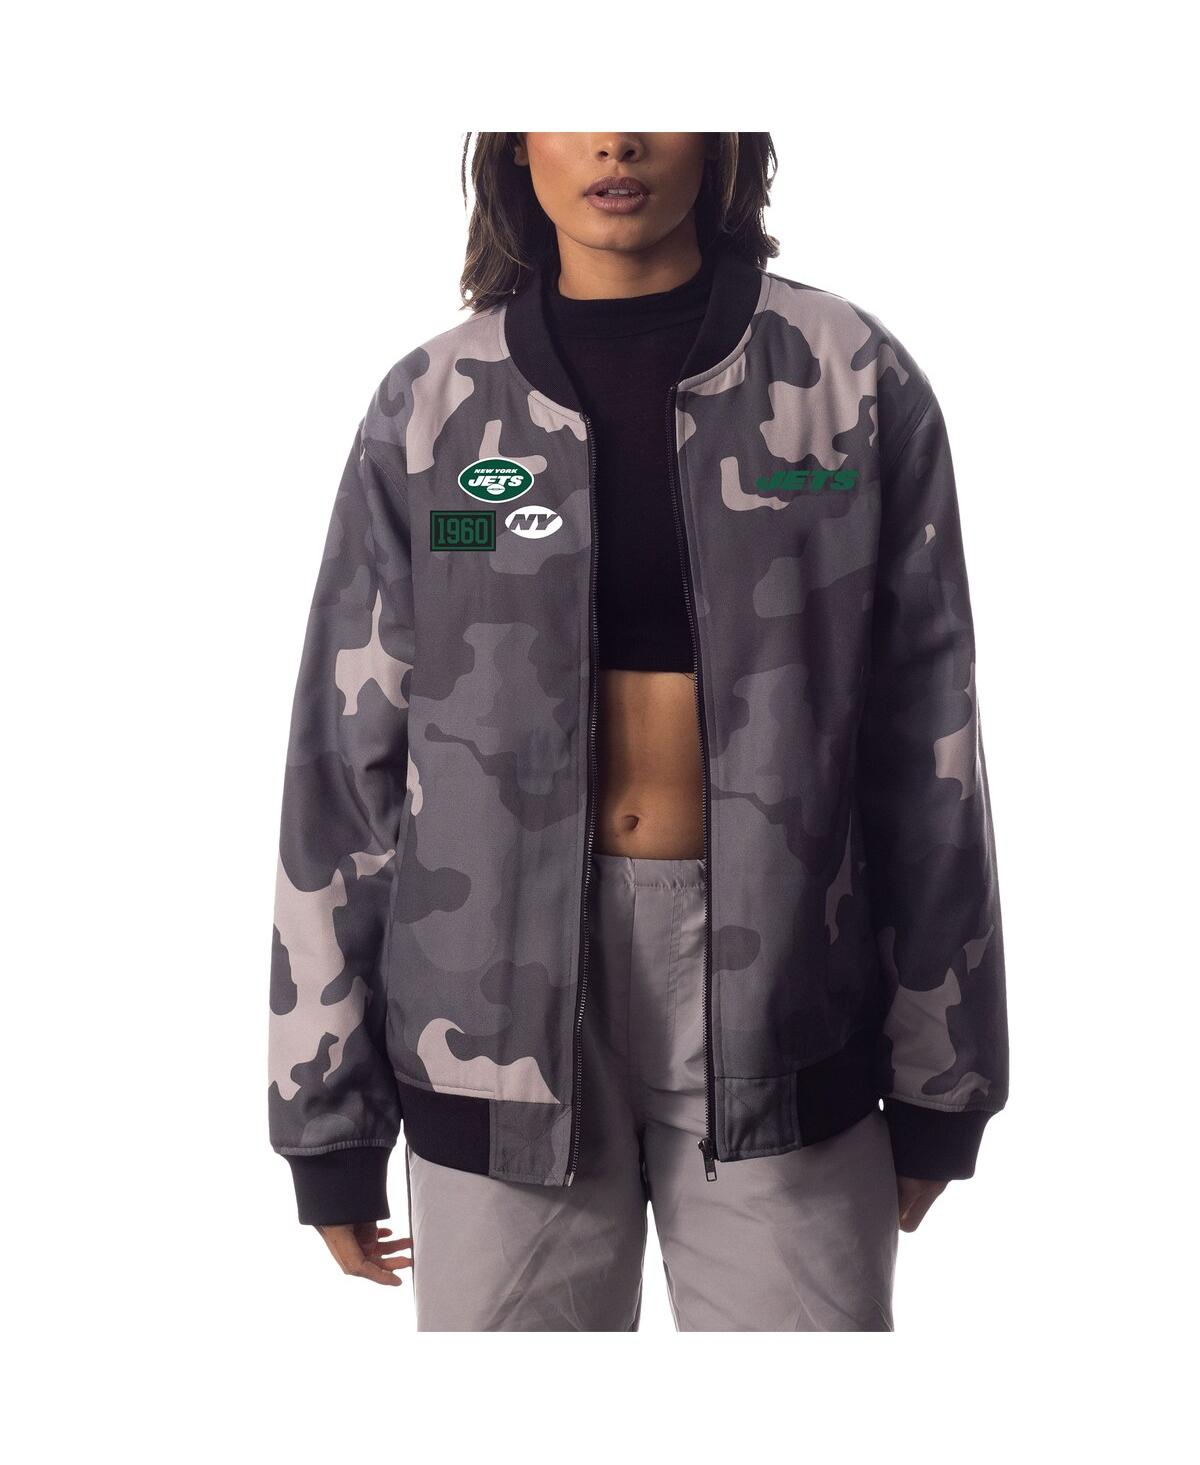 Shop The Wild Collective Men's And Women's  Gray Distressed New York Jets Camo Bomber Jacket